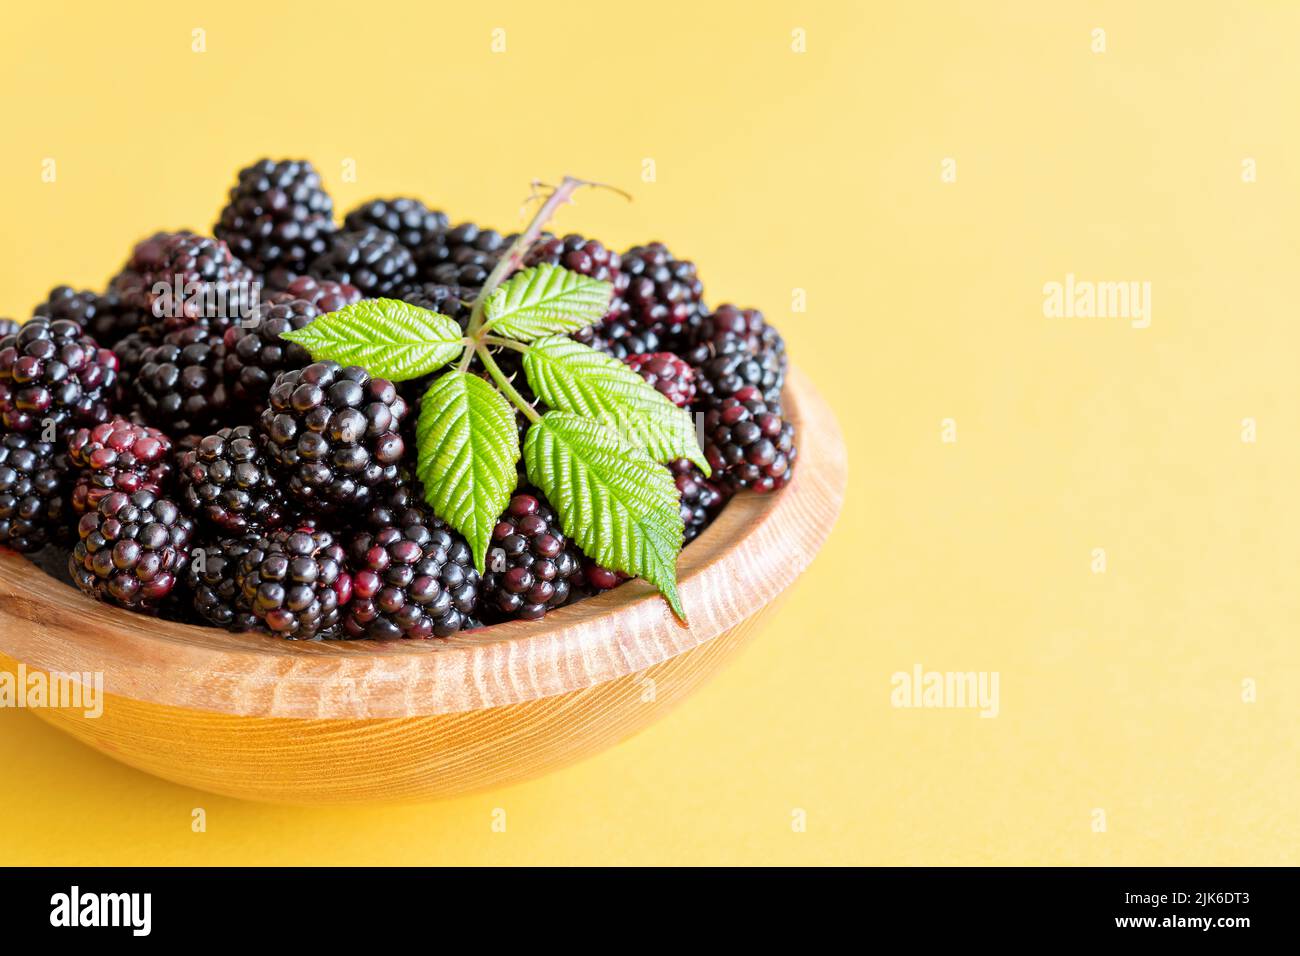 A wooden bowl of freshly picked, wild blackberries, Rubus fruticosus. A bramble leaf has been presented on top of the juicy black countryside fruits Stock Photo